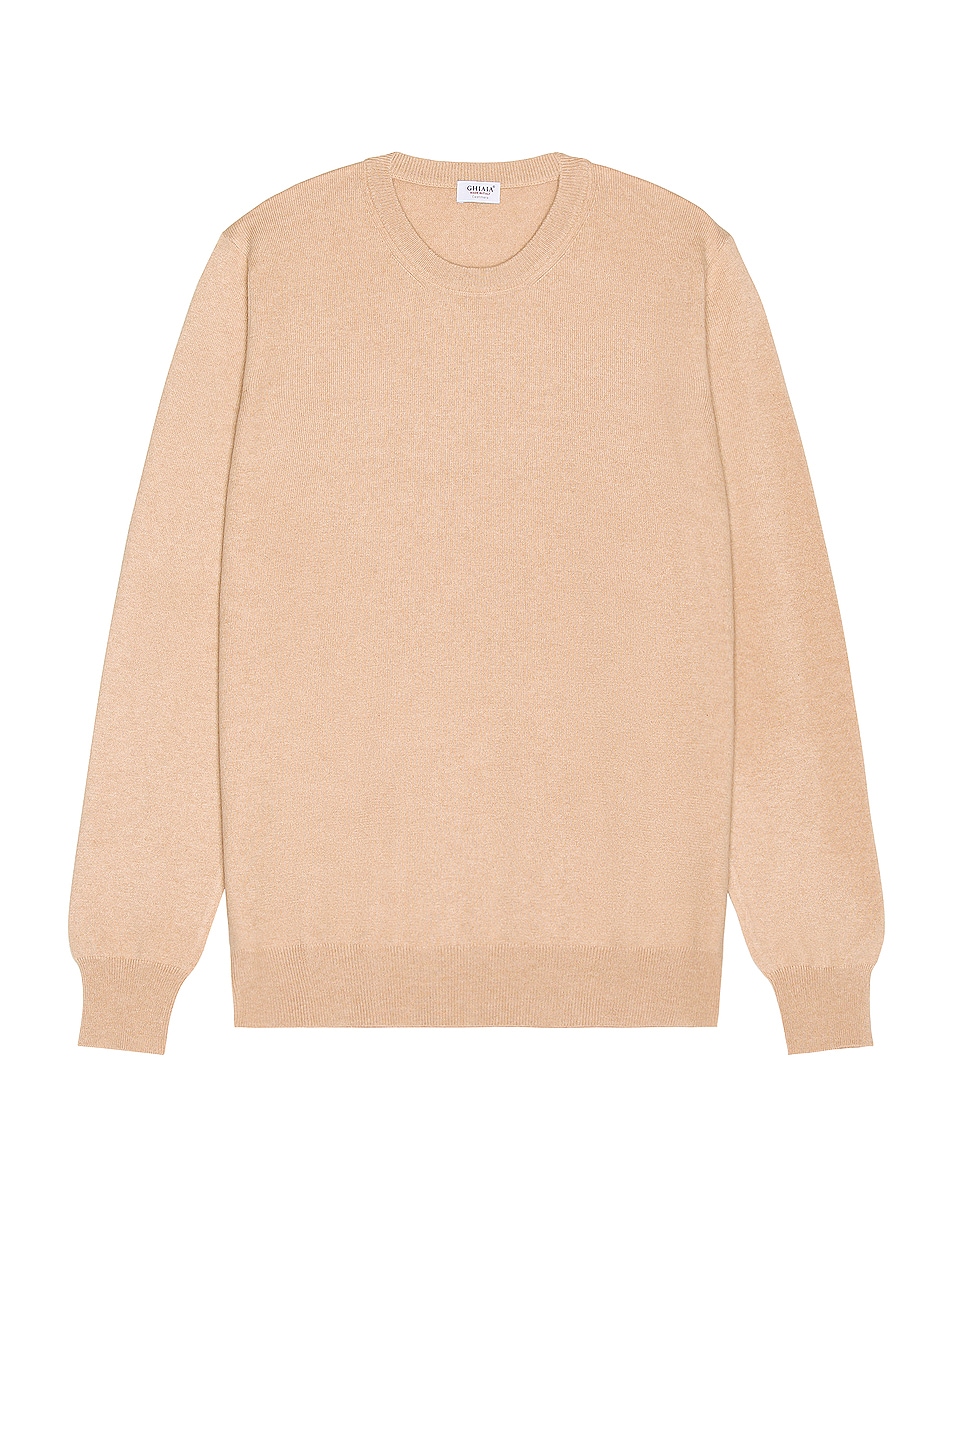 Image 1 of Ghiaia Cashmere Cashmere Crewneck in Camel